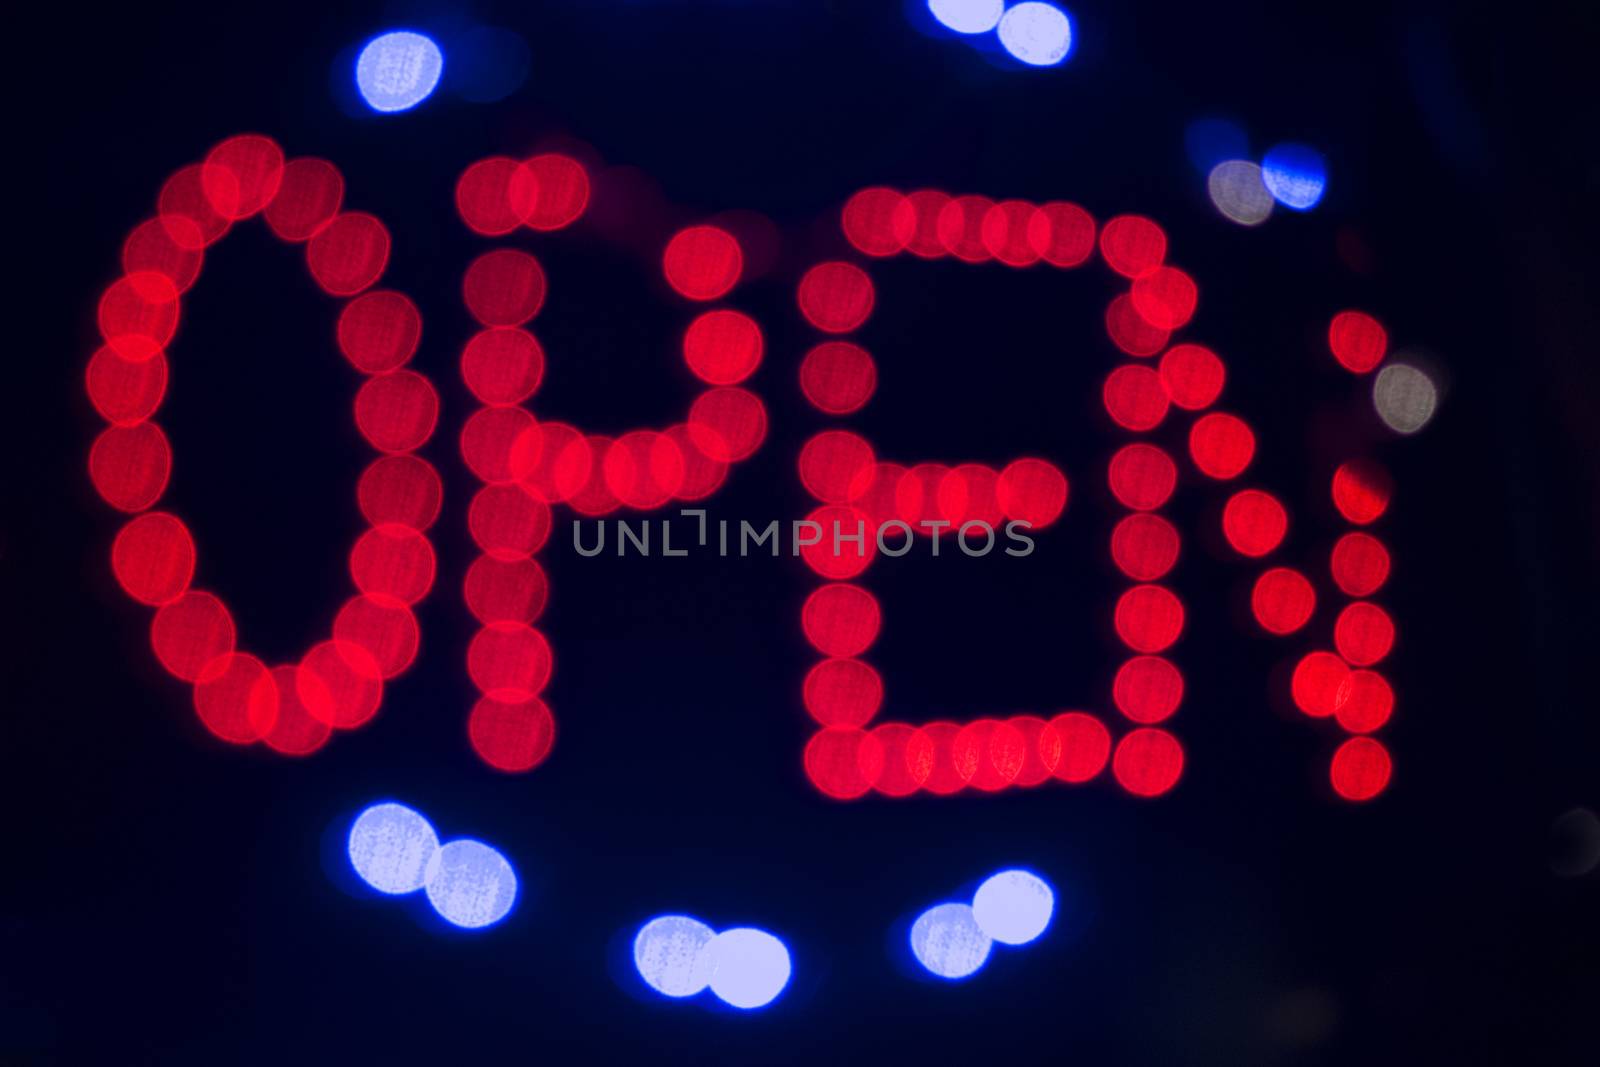 Neon open sign at night by edwardolive